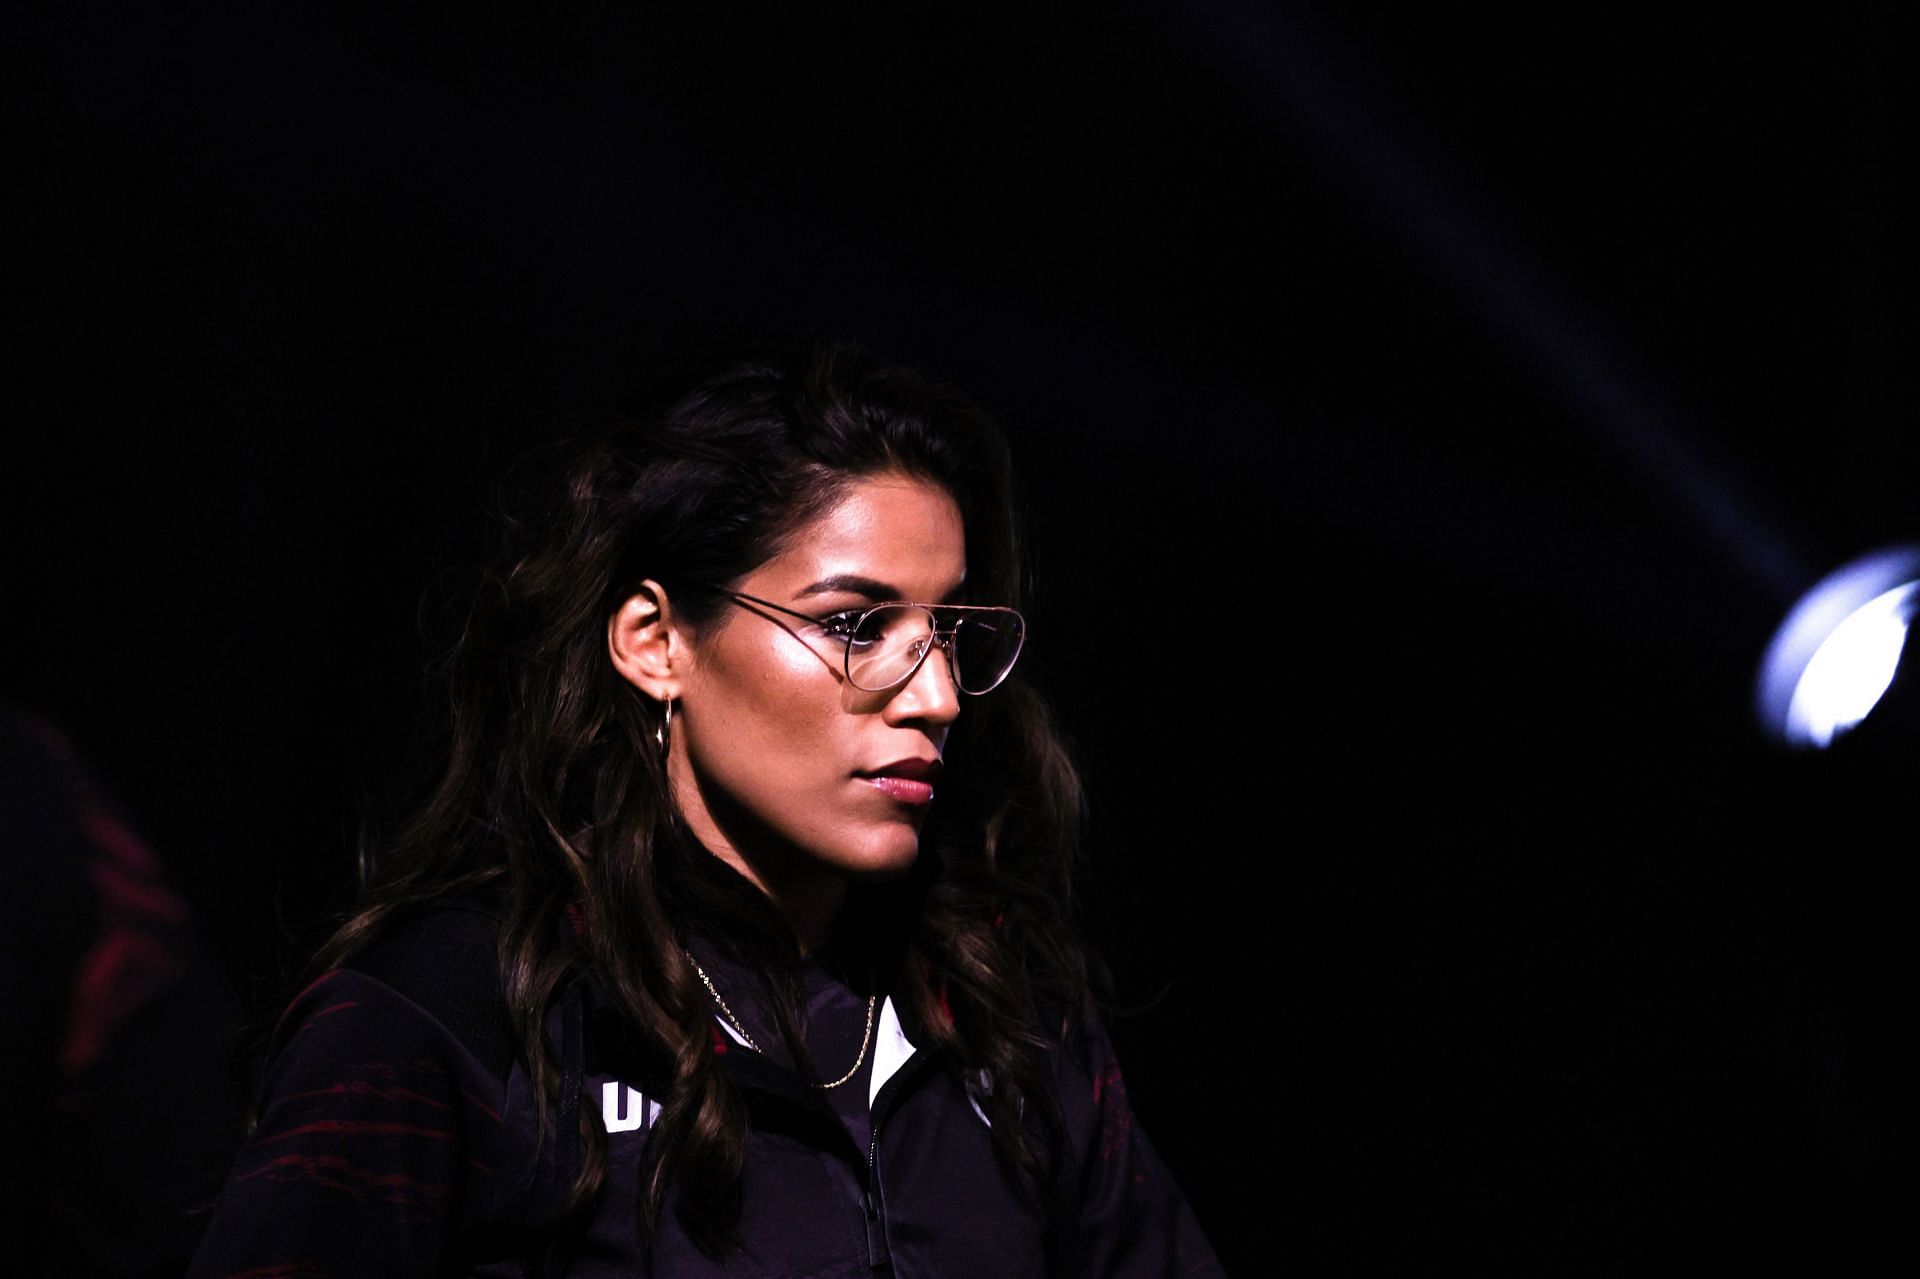 Julianna Pena explains lack of trash talk on Season 30 of The Ultimate  Fighter: I feel bad for the poor girl. You want me to continue to talk?